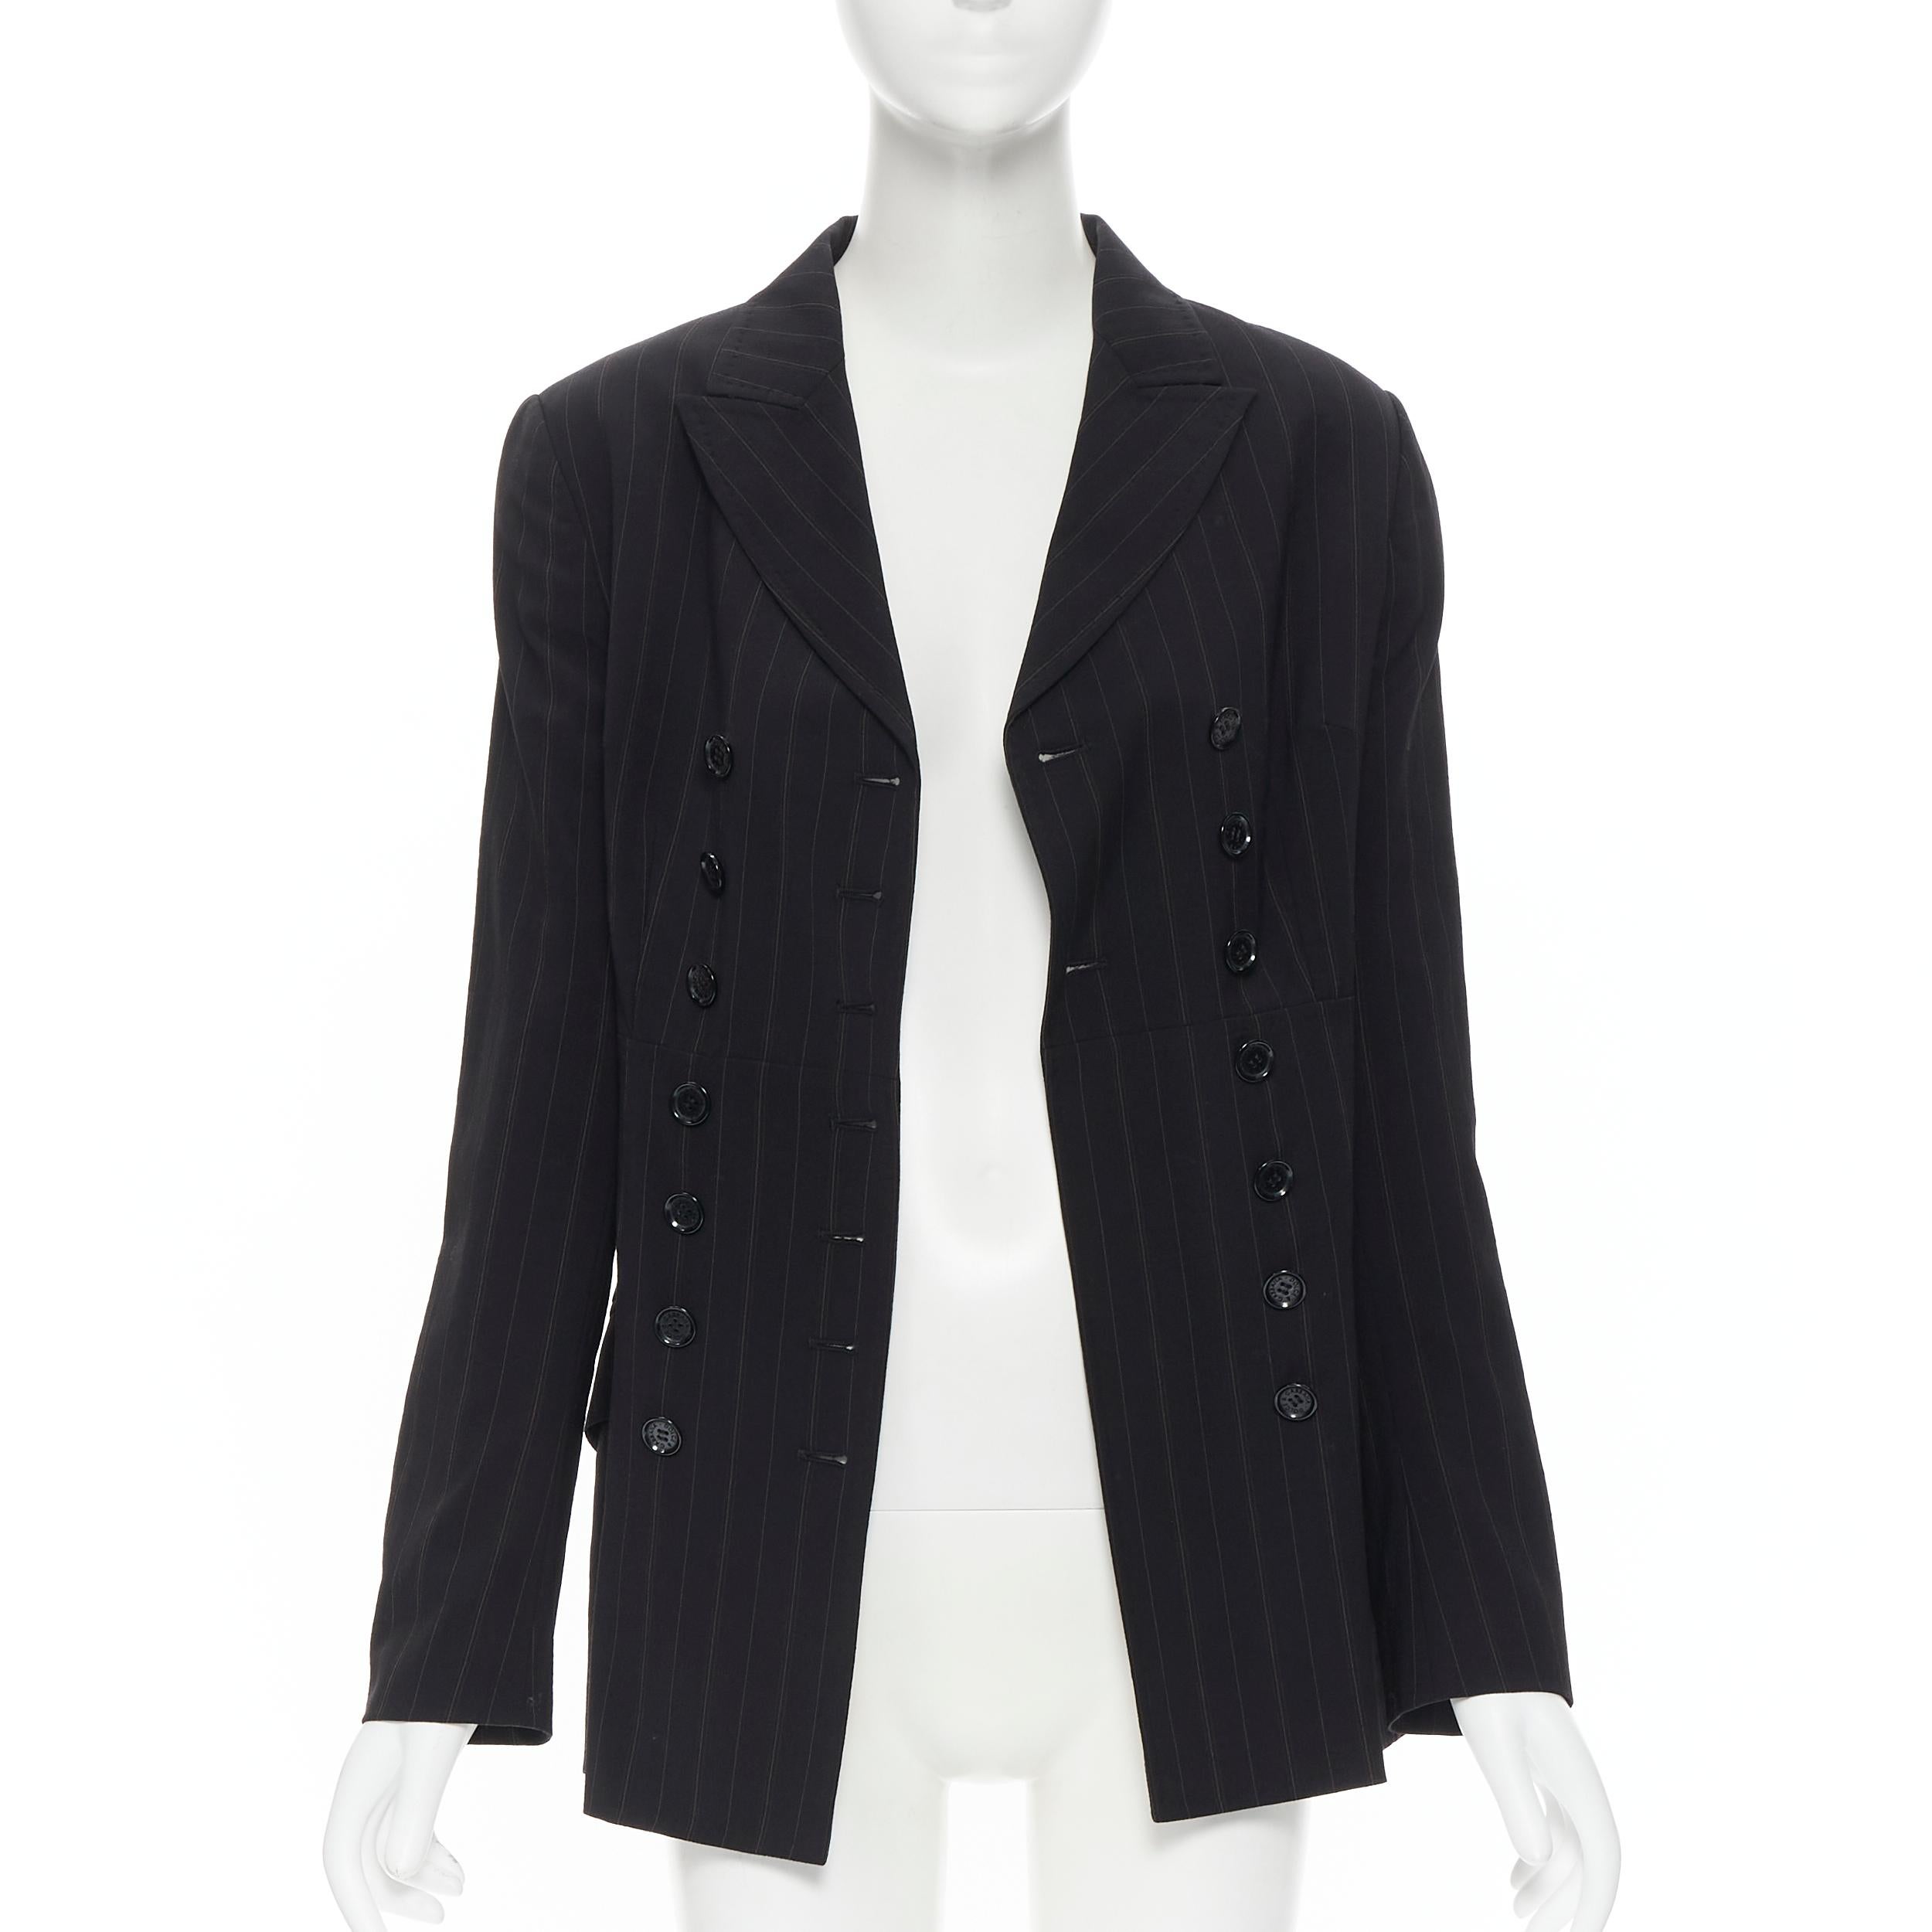 DOLE GABBANA black pinstripe wool double breasted blazer skirt set IT42 M 
Reference: GIYG/A00050 
Brand: Dolce Gabbana 
Material: Wool 
Color: Black 
Pattern: Striped 
Closure: Button 
Extra Detail: This blazer comes with the complimentary matching